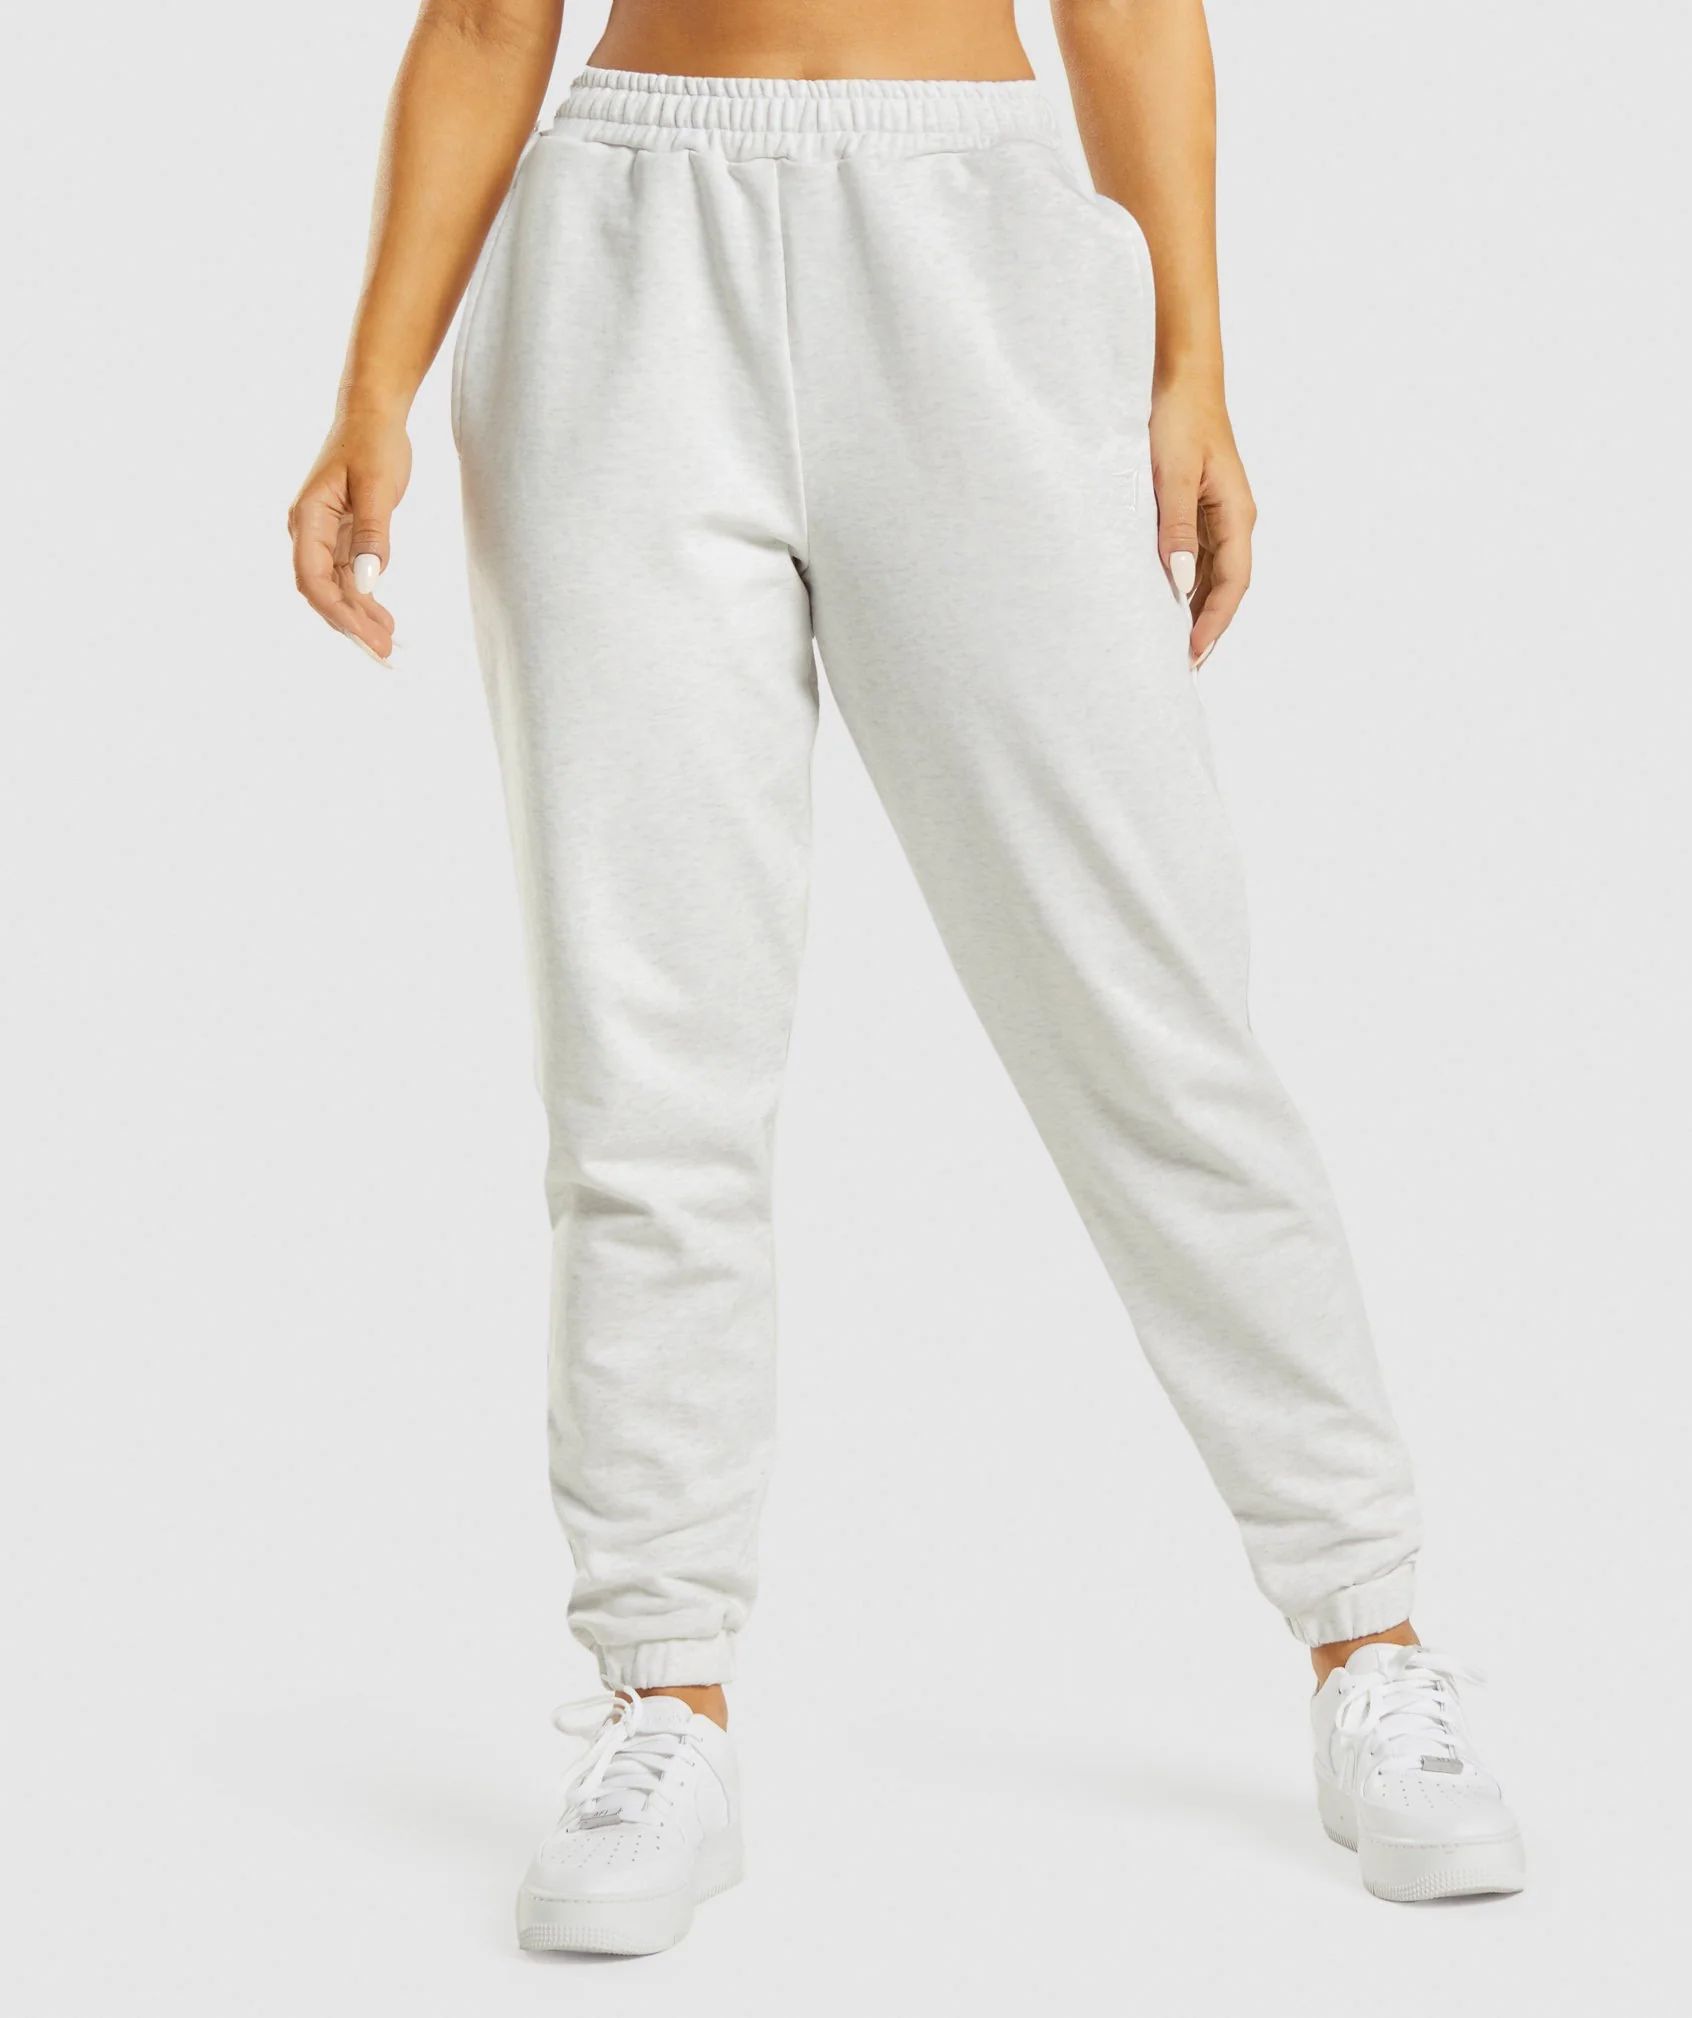 Rest Day Sweats Joggers White Marl | Gymshark US